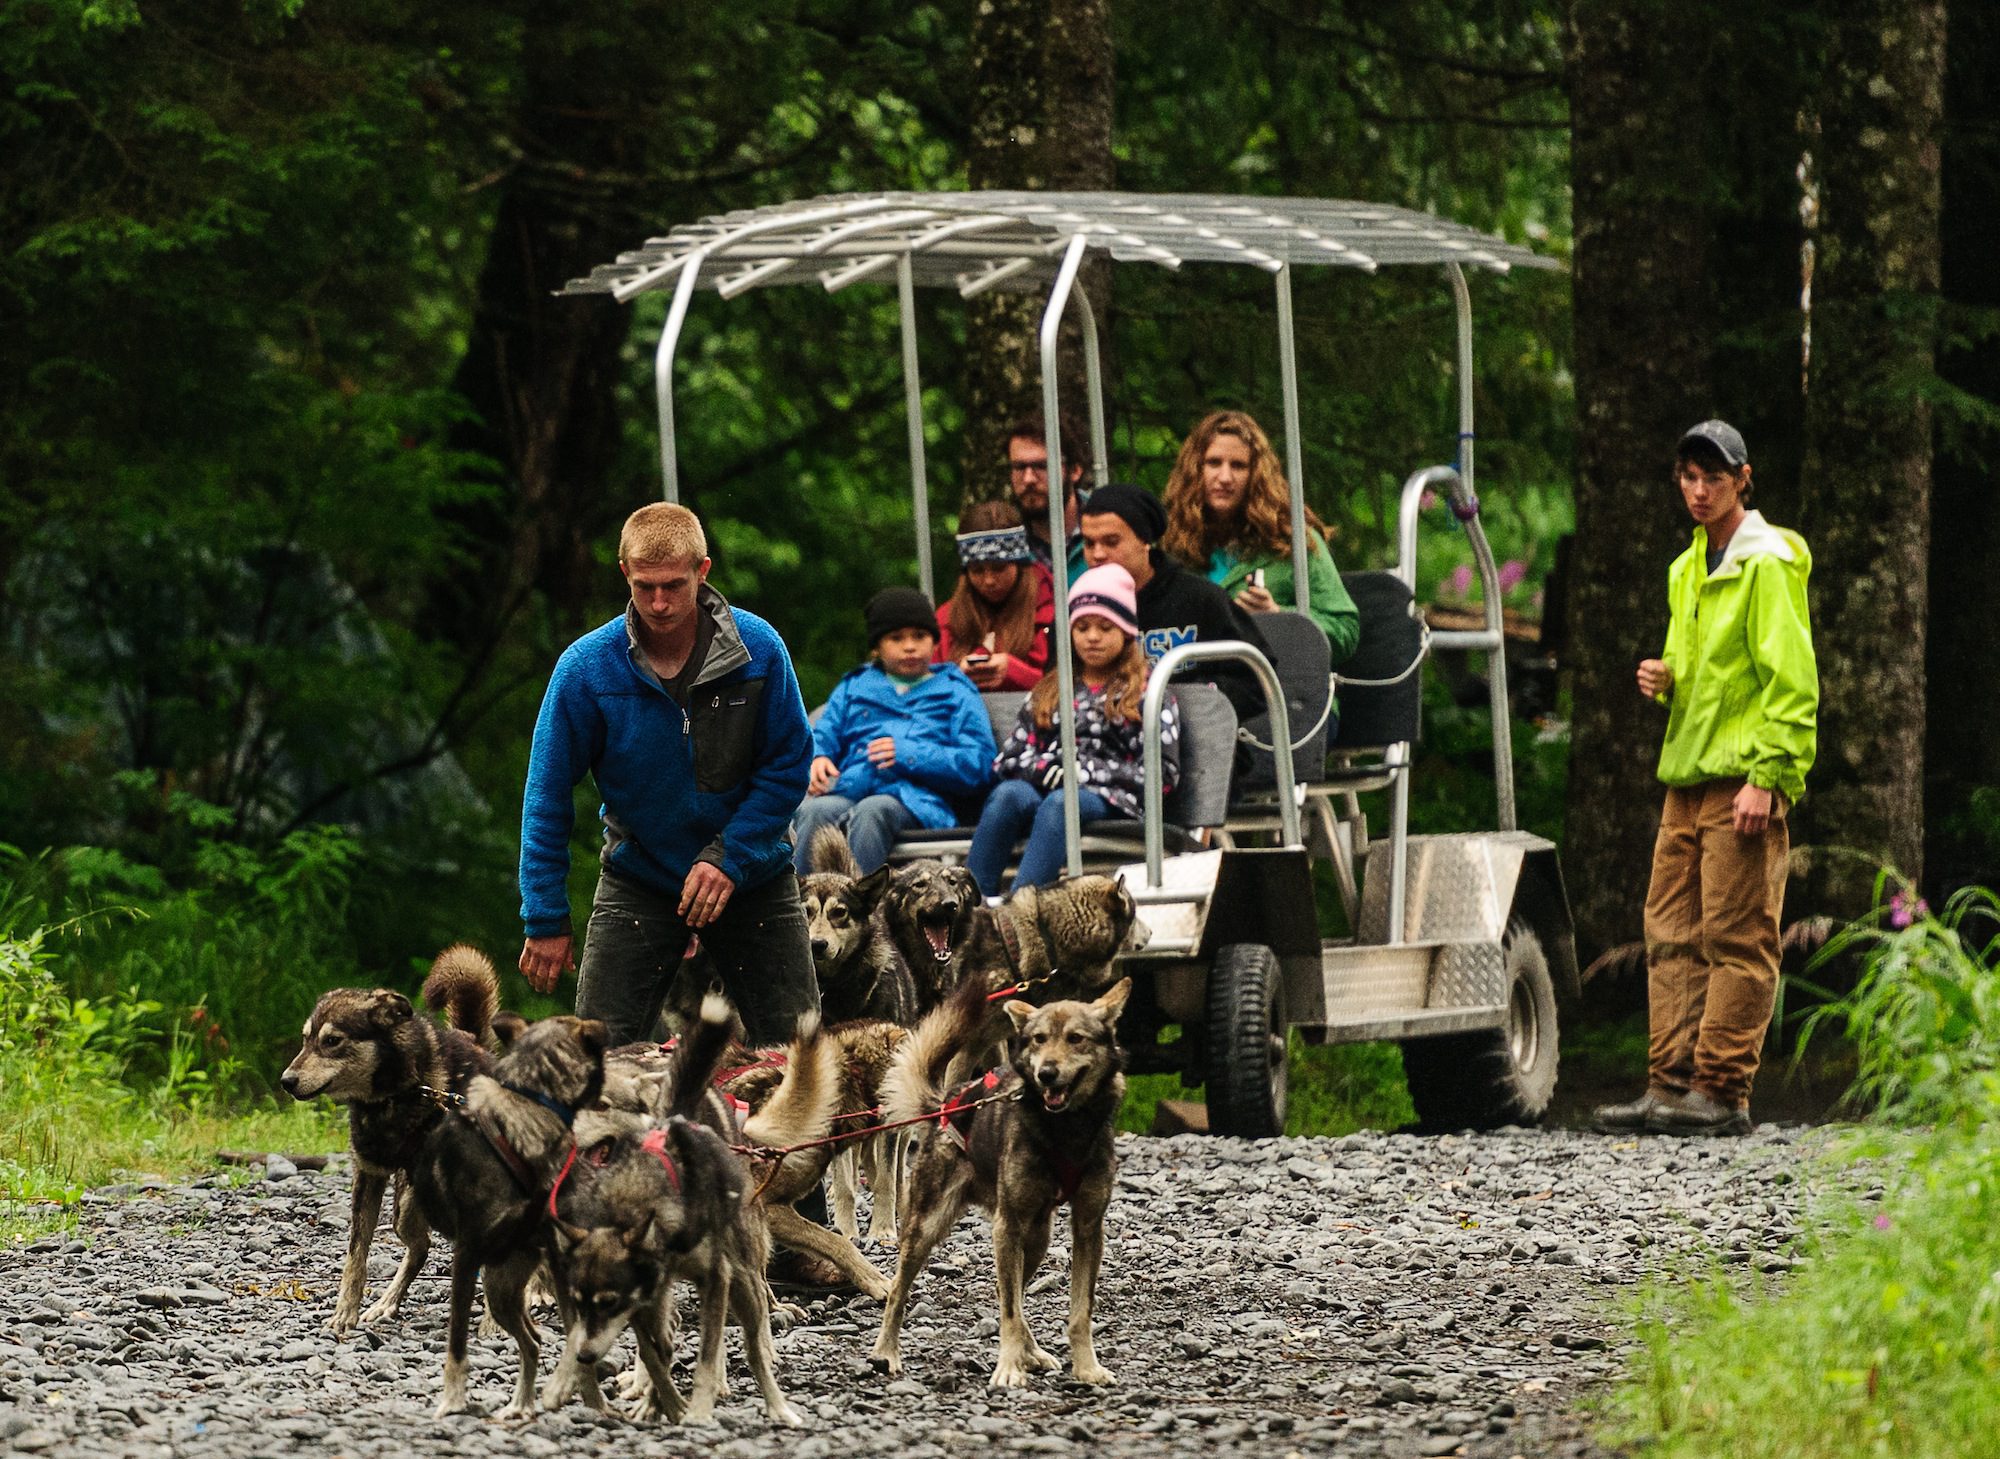 Dog Sled Tours are an important part of Iditarod Training